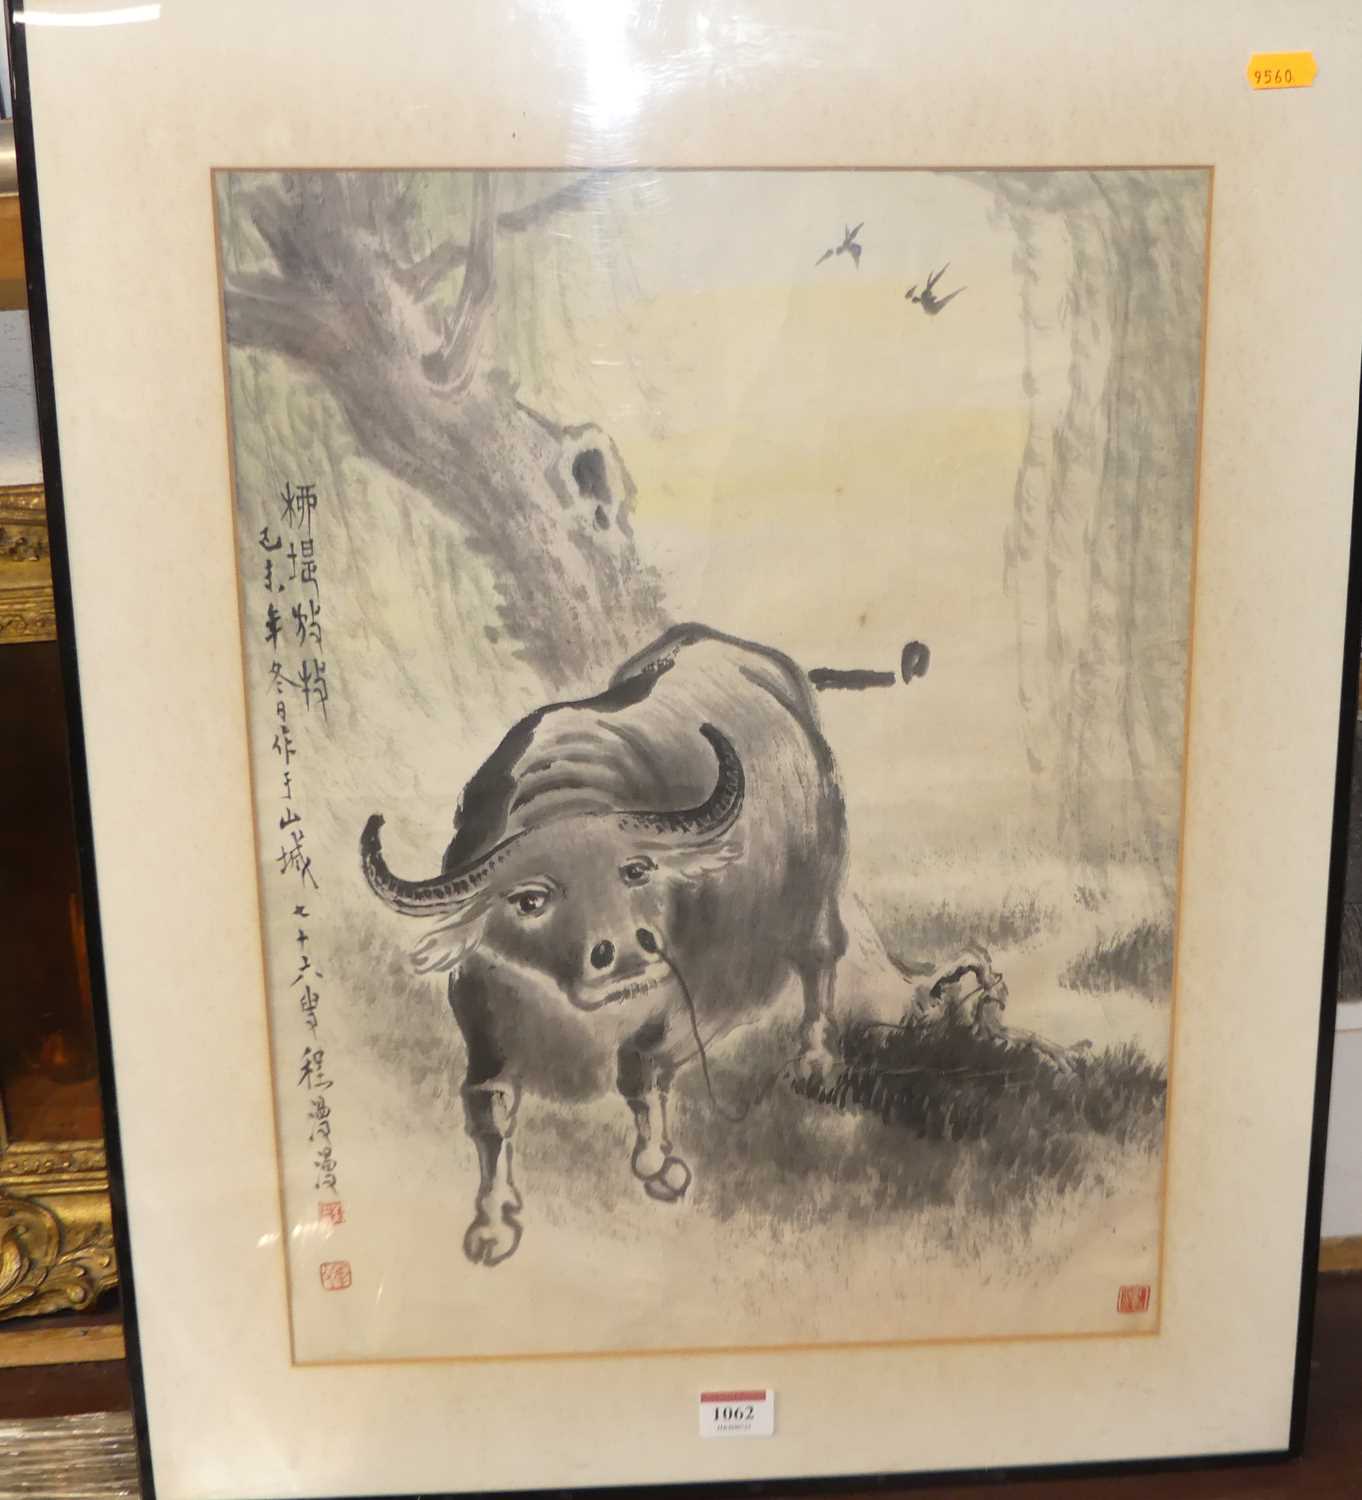 Early 20th century Japanese sepia watercolour depicting water buffalo, signed and with studio seals,